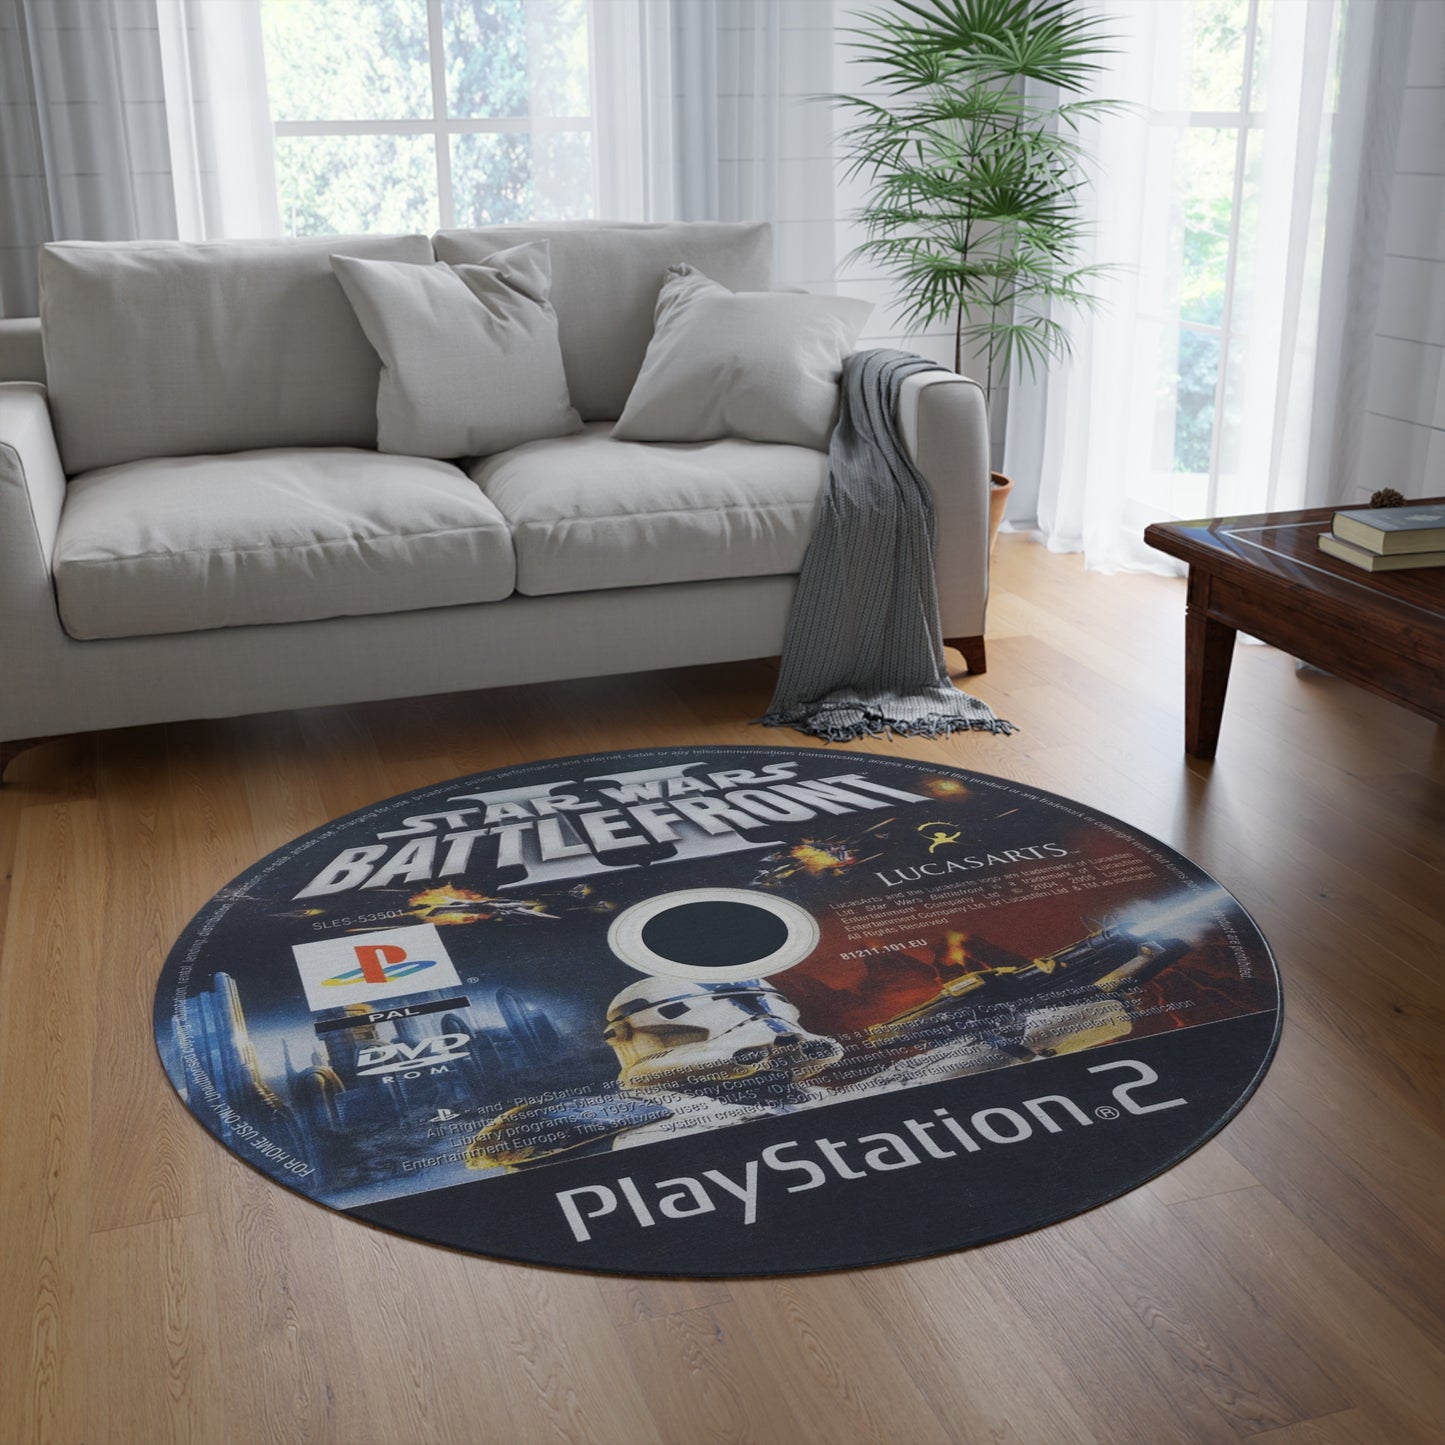 A More Civilized Age round rug